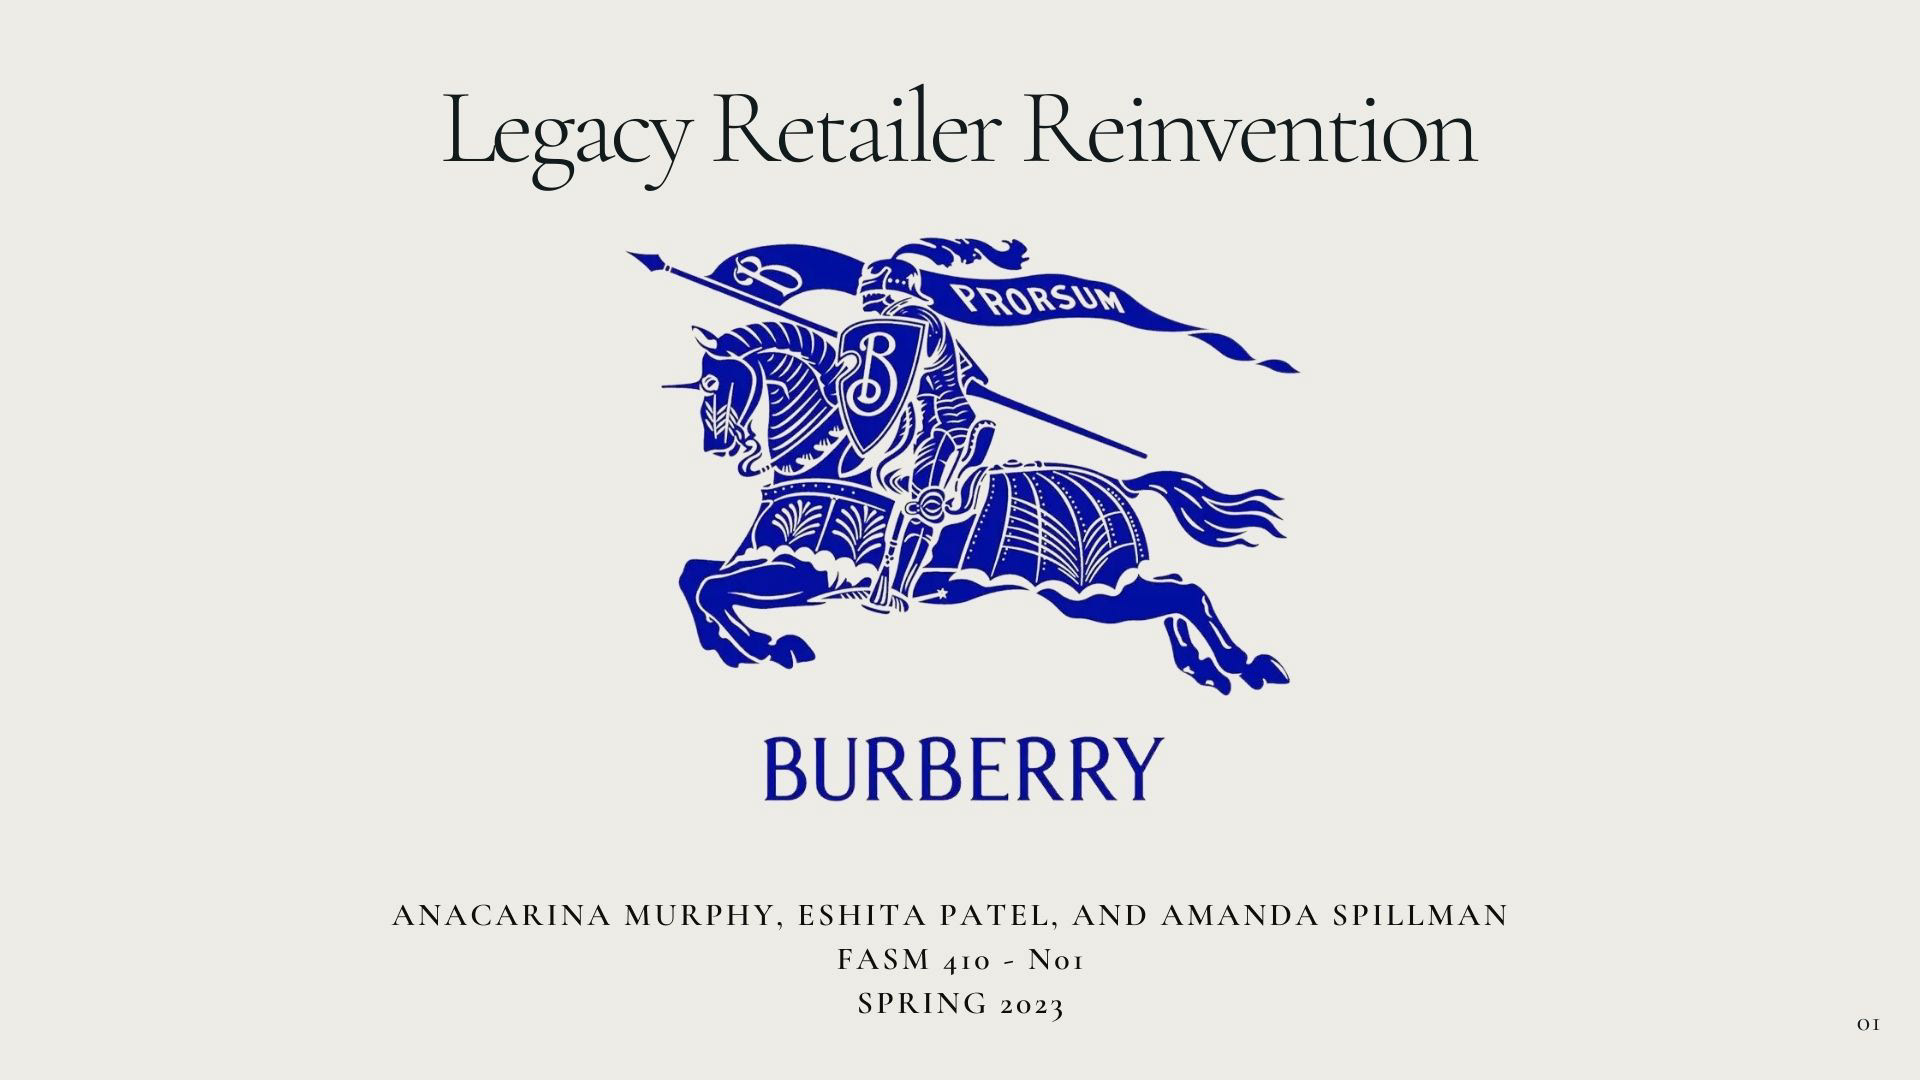 Legacy Retailer Reinvention - Burberry rendition image